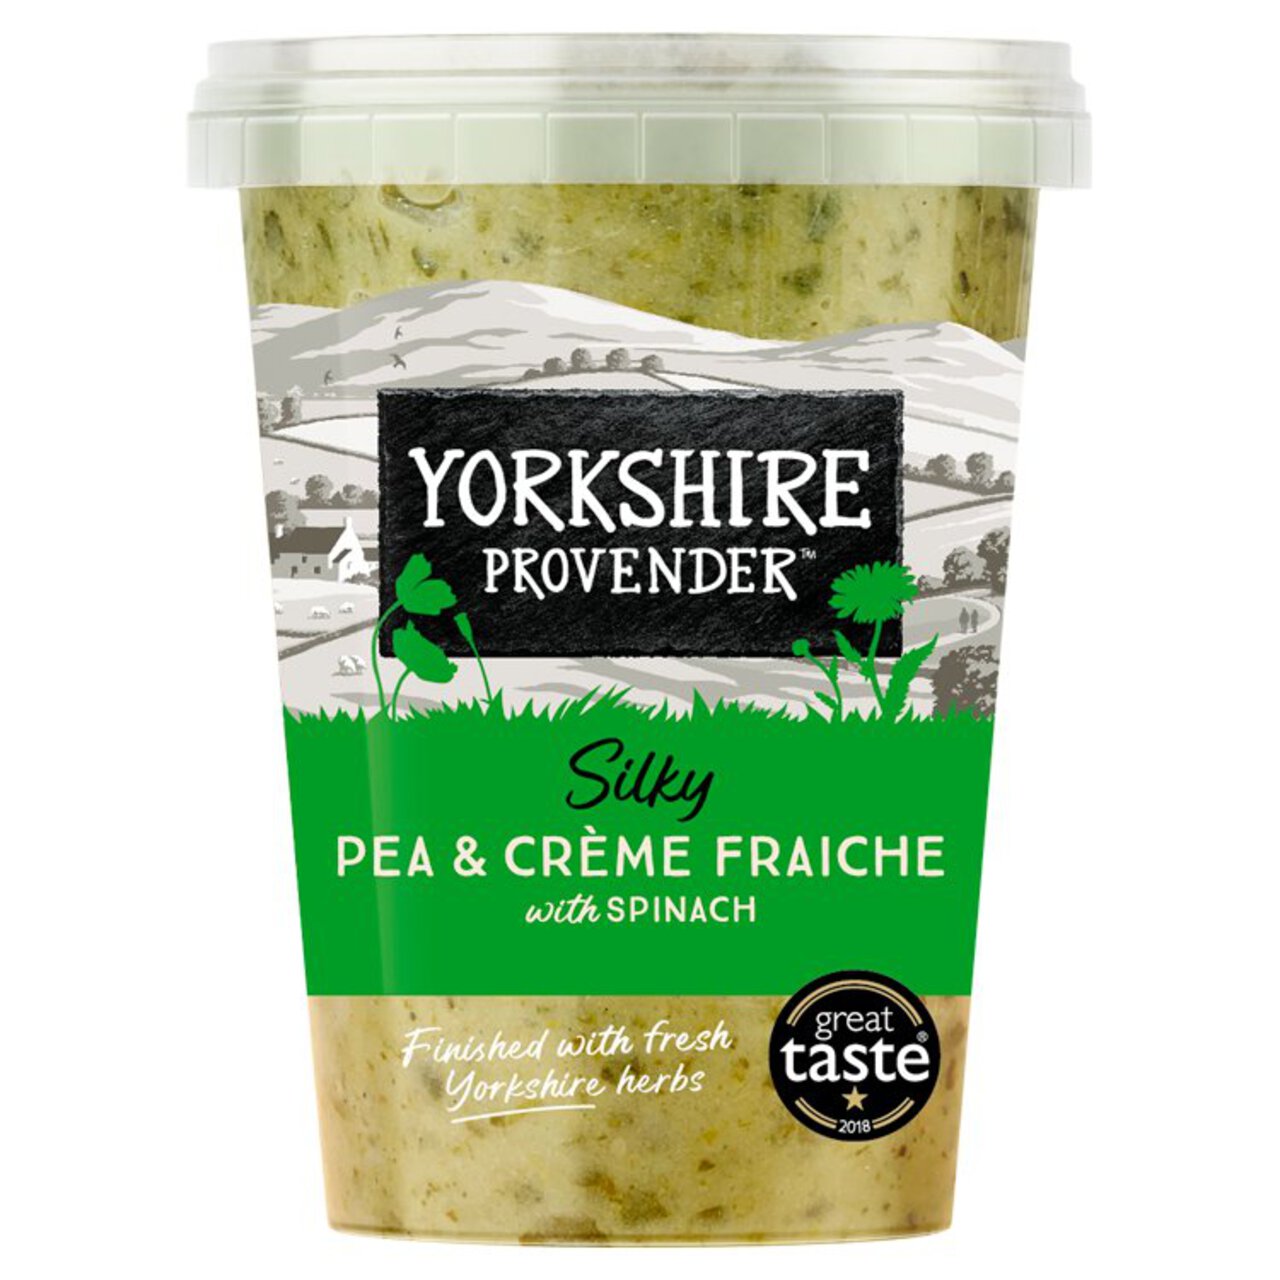 Yorkshire Provender Pea & Creme Fraiche With Spinach 560g